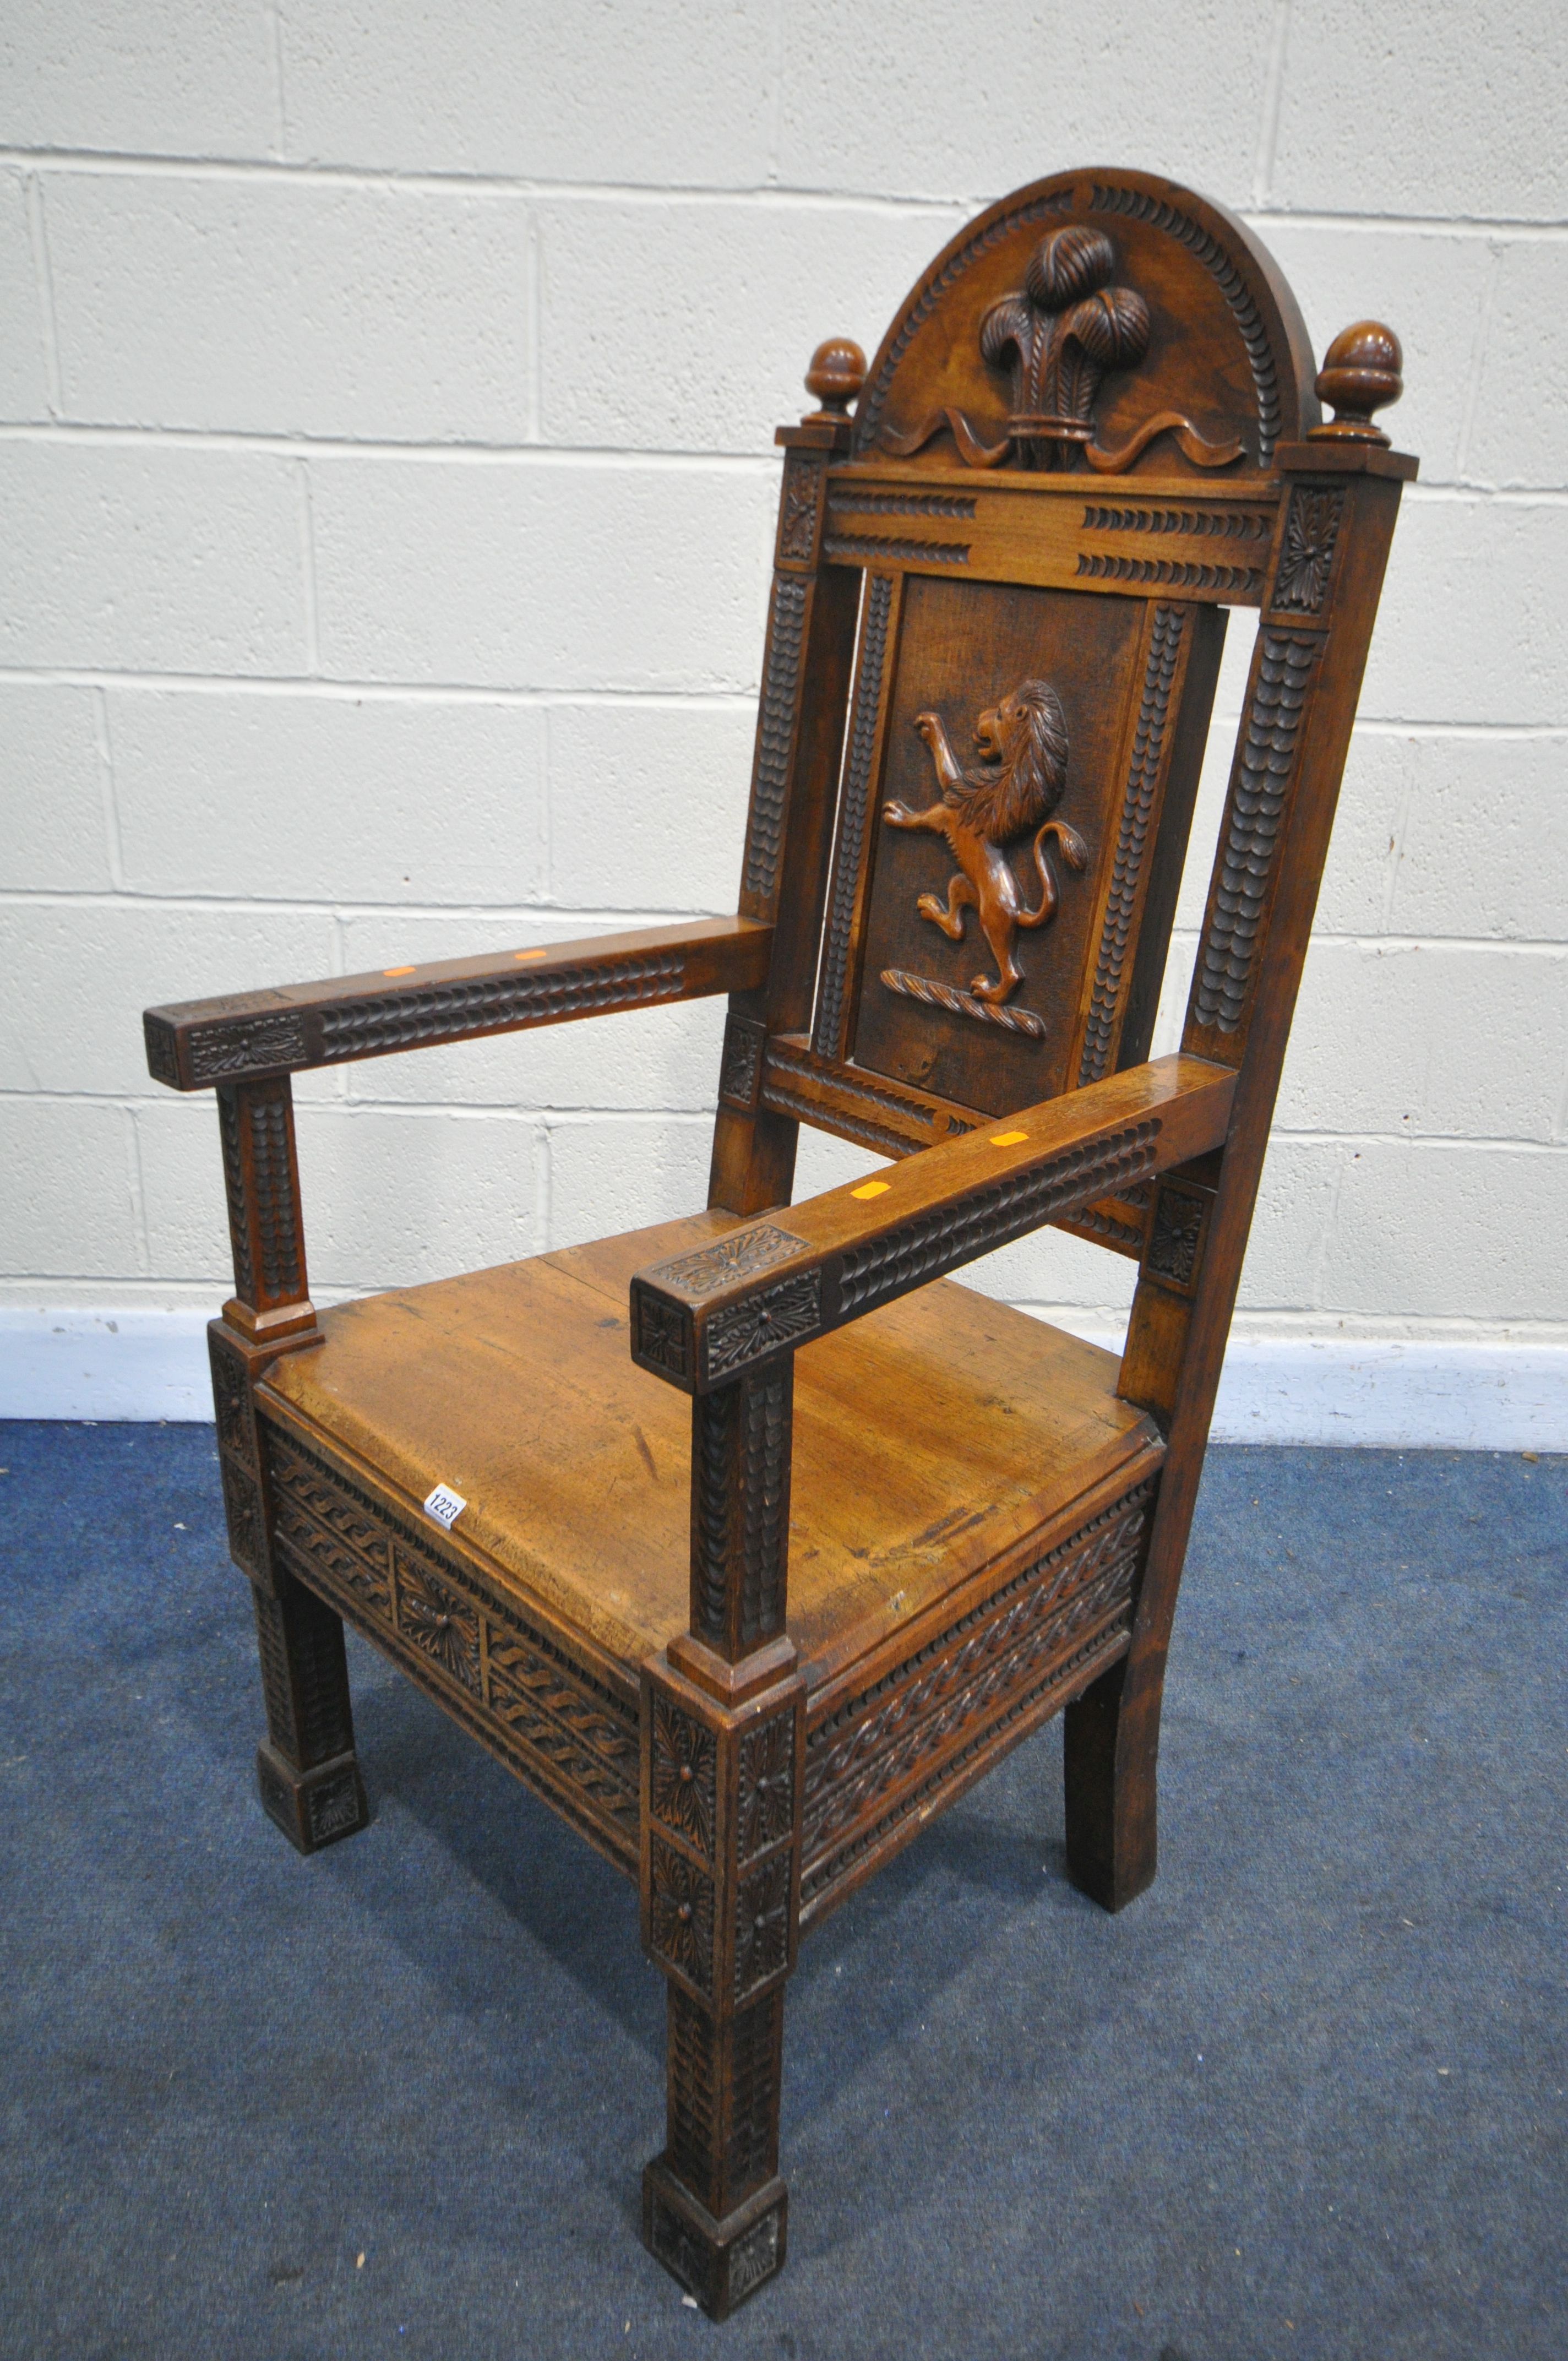 A LATE 19TH/ EARLY 20TH CENTURY CARVED OAK WAINSCOT CHAIR, the arched top depicting - Image 2 of 7